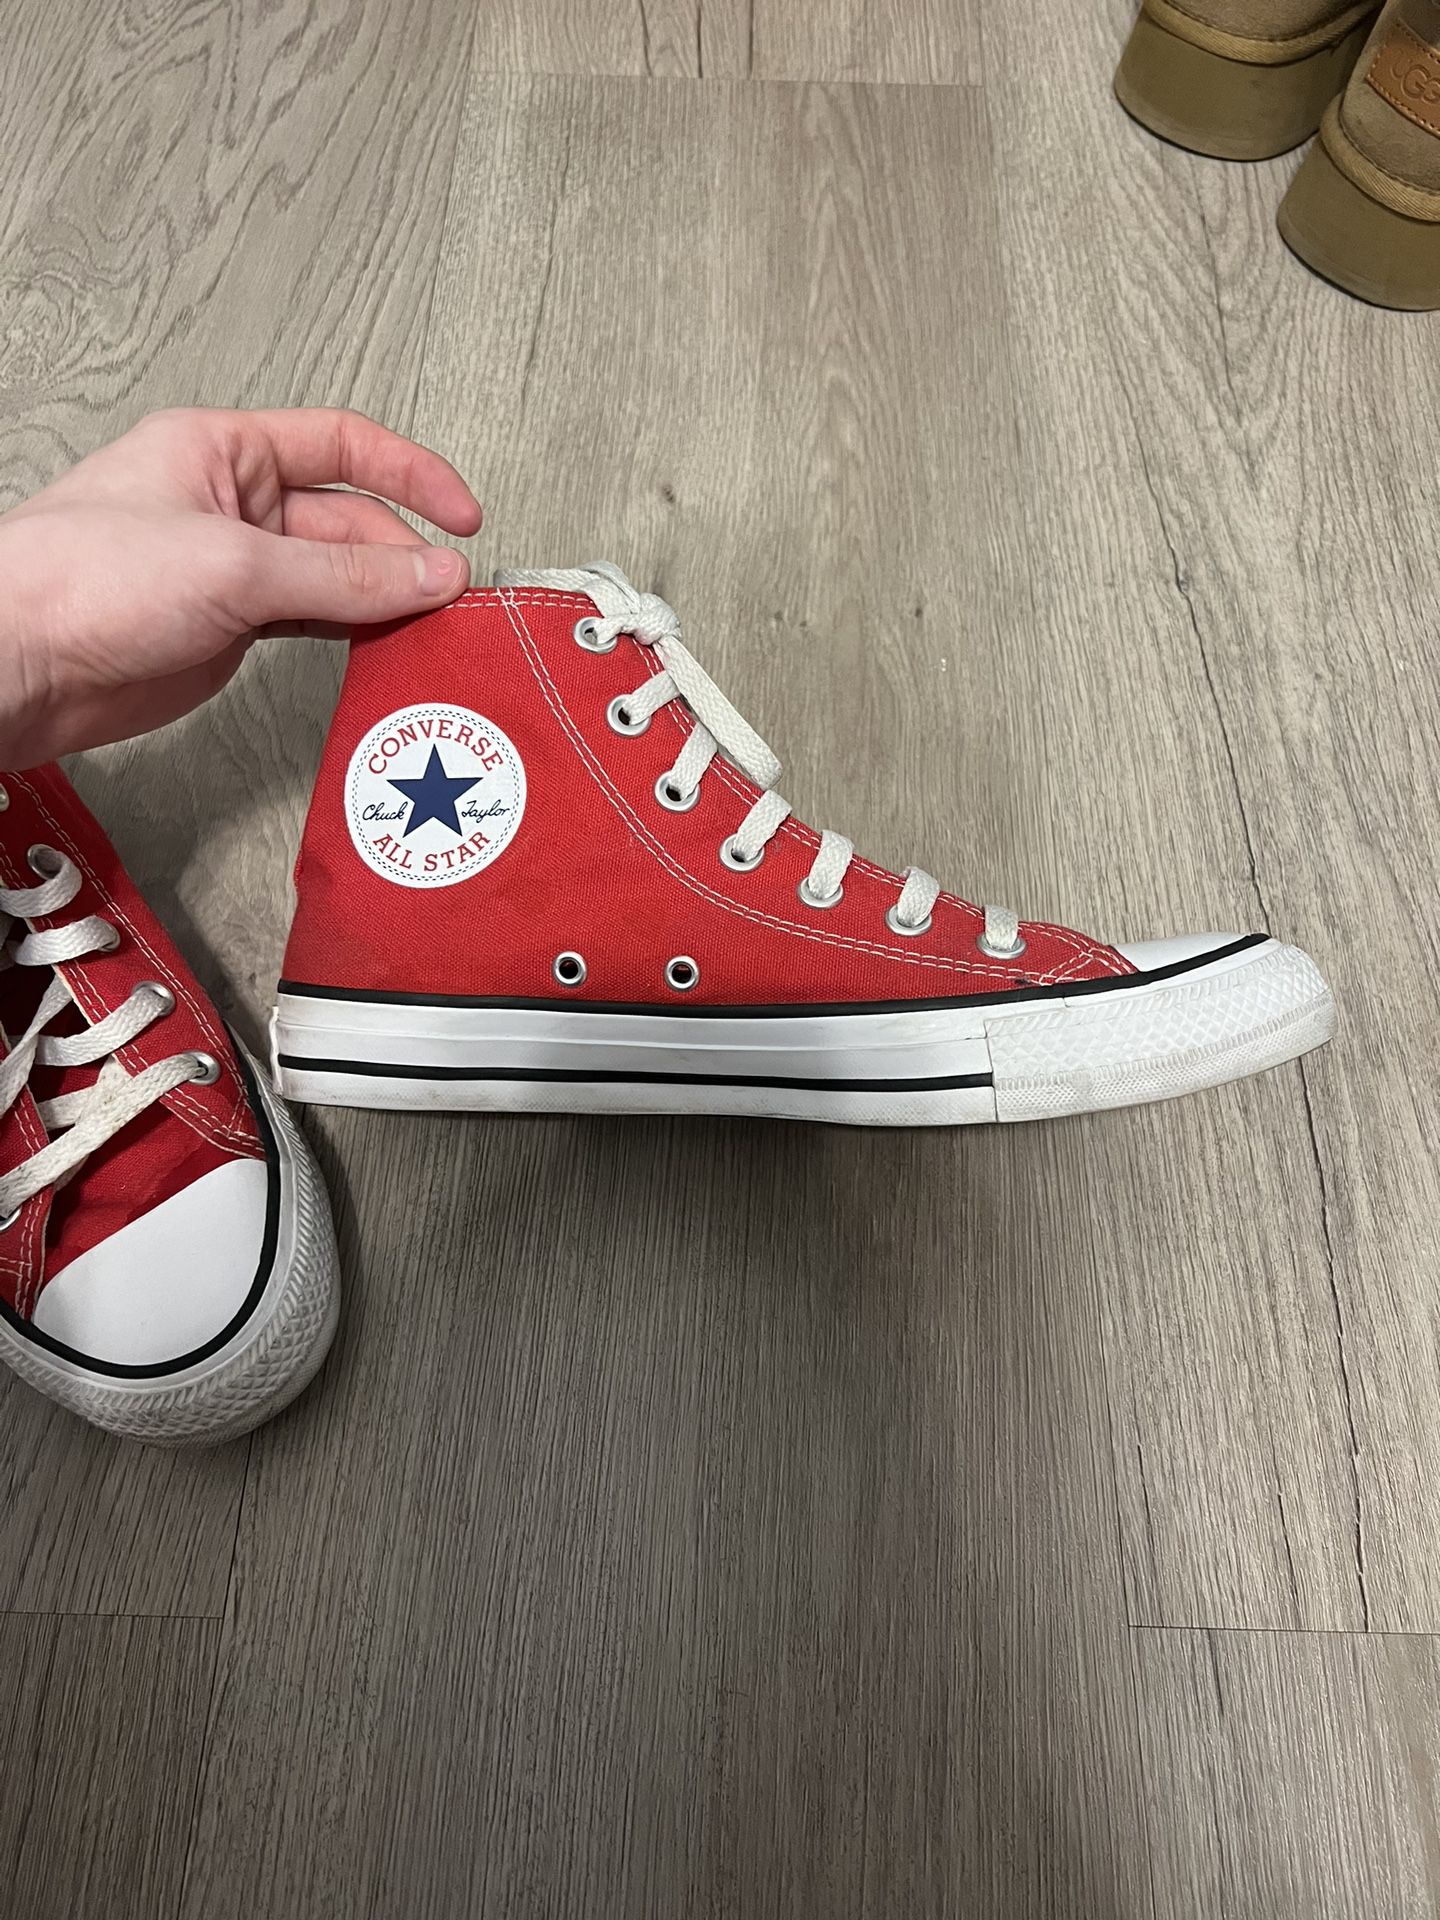 Red Converse!